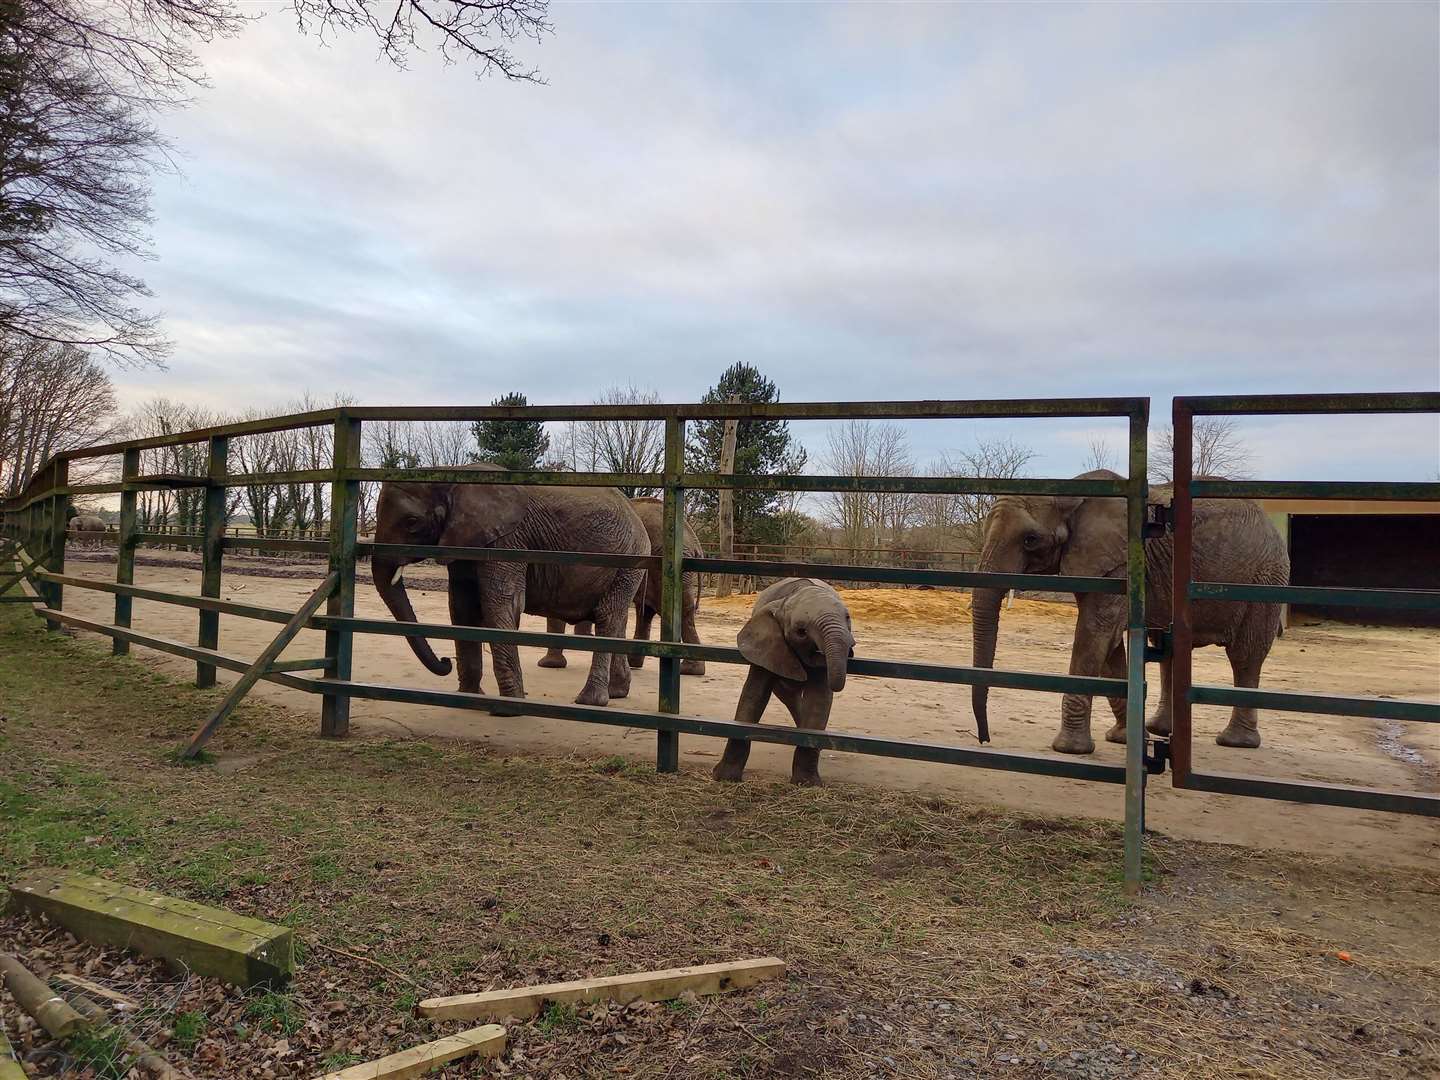 The elephants at Howletts are to depart in the summer